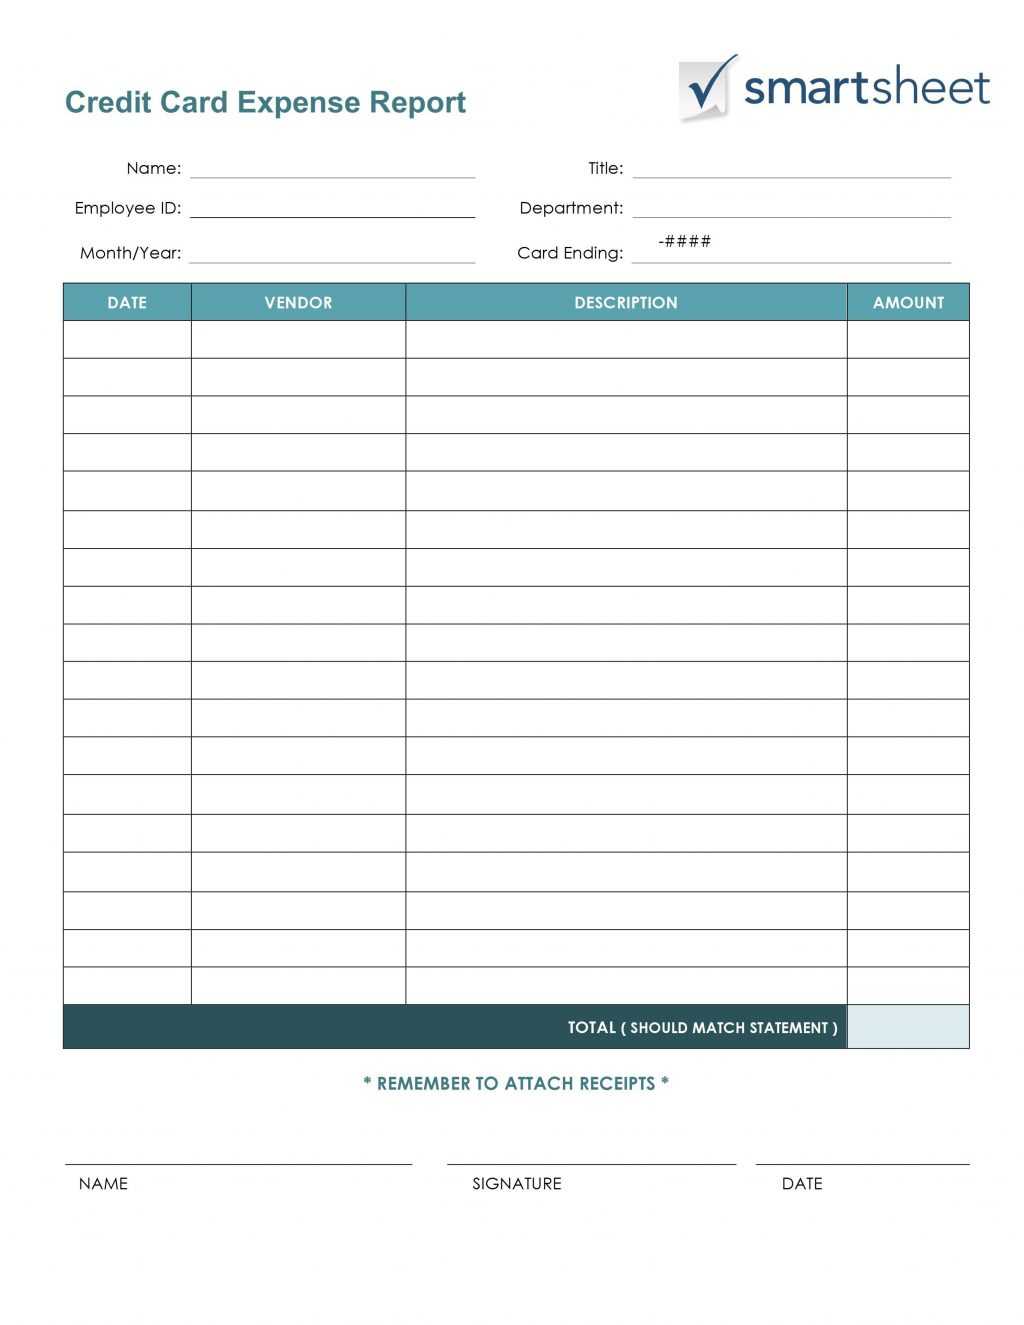 Credit Card Budget Spreadsheet Template Employee Expense Throughout Expense Report Template Excel 2010